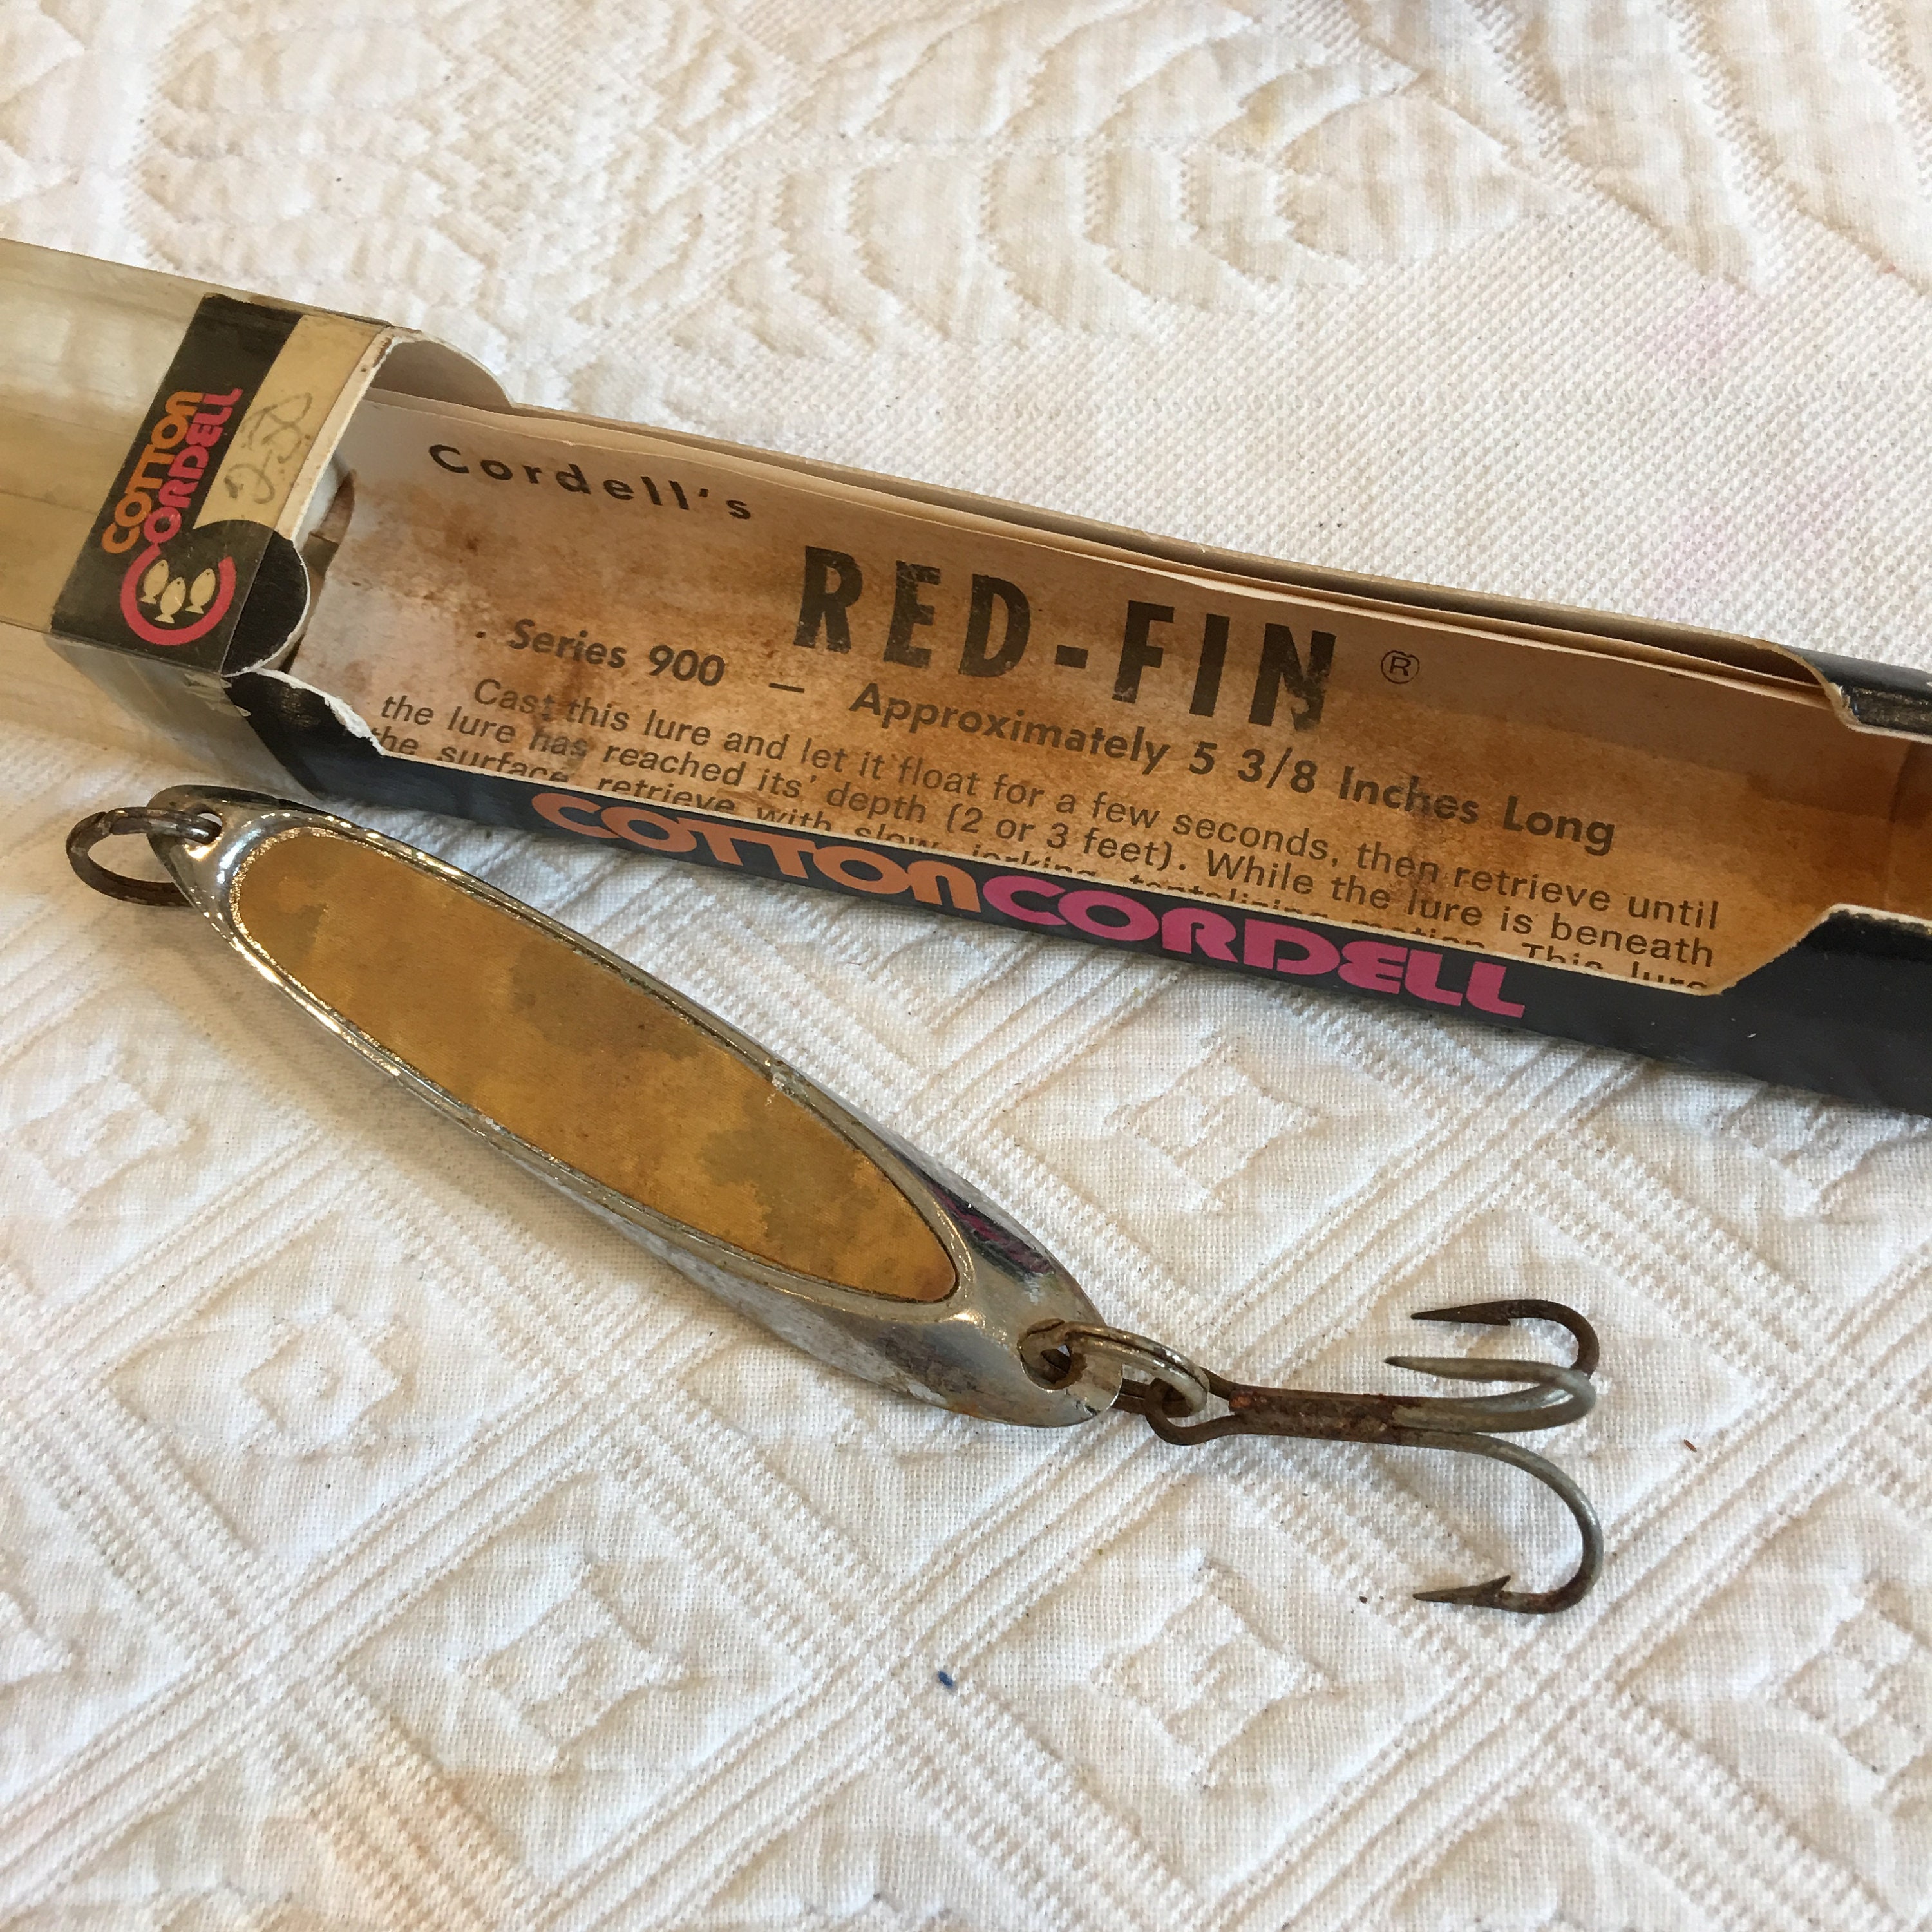 Vintage Red Fin Fish Lure. Cotton Cordell Series 900 Fishing Lure